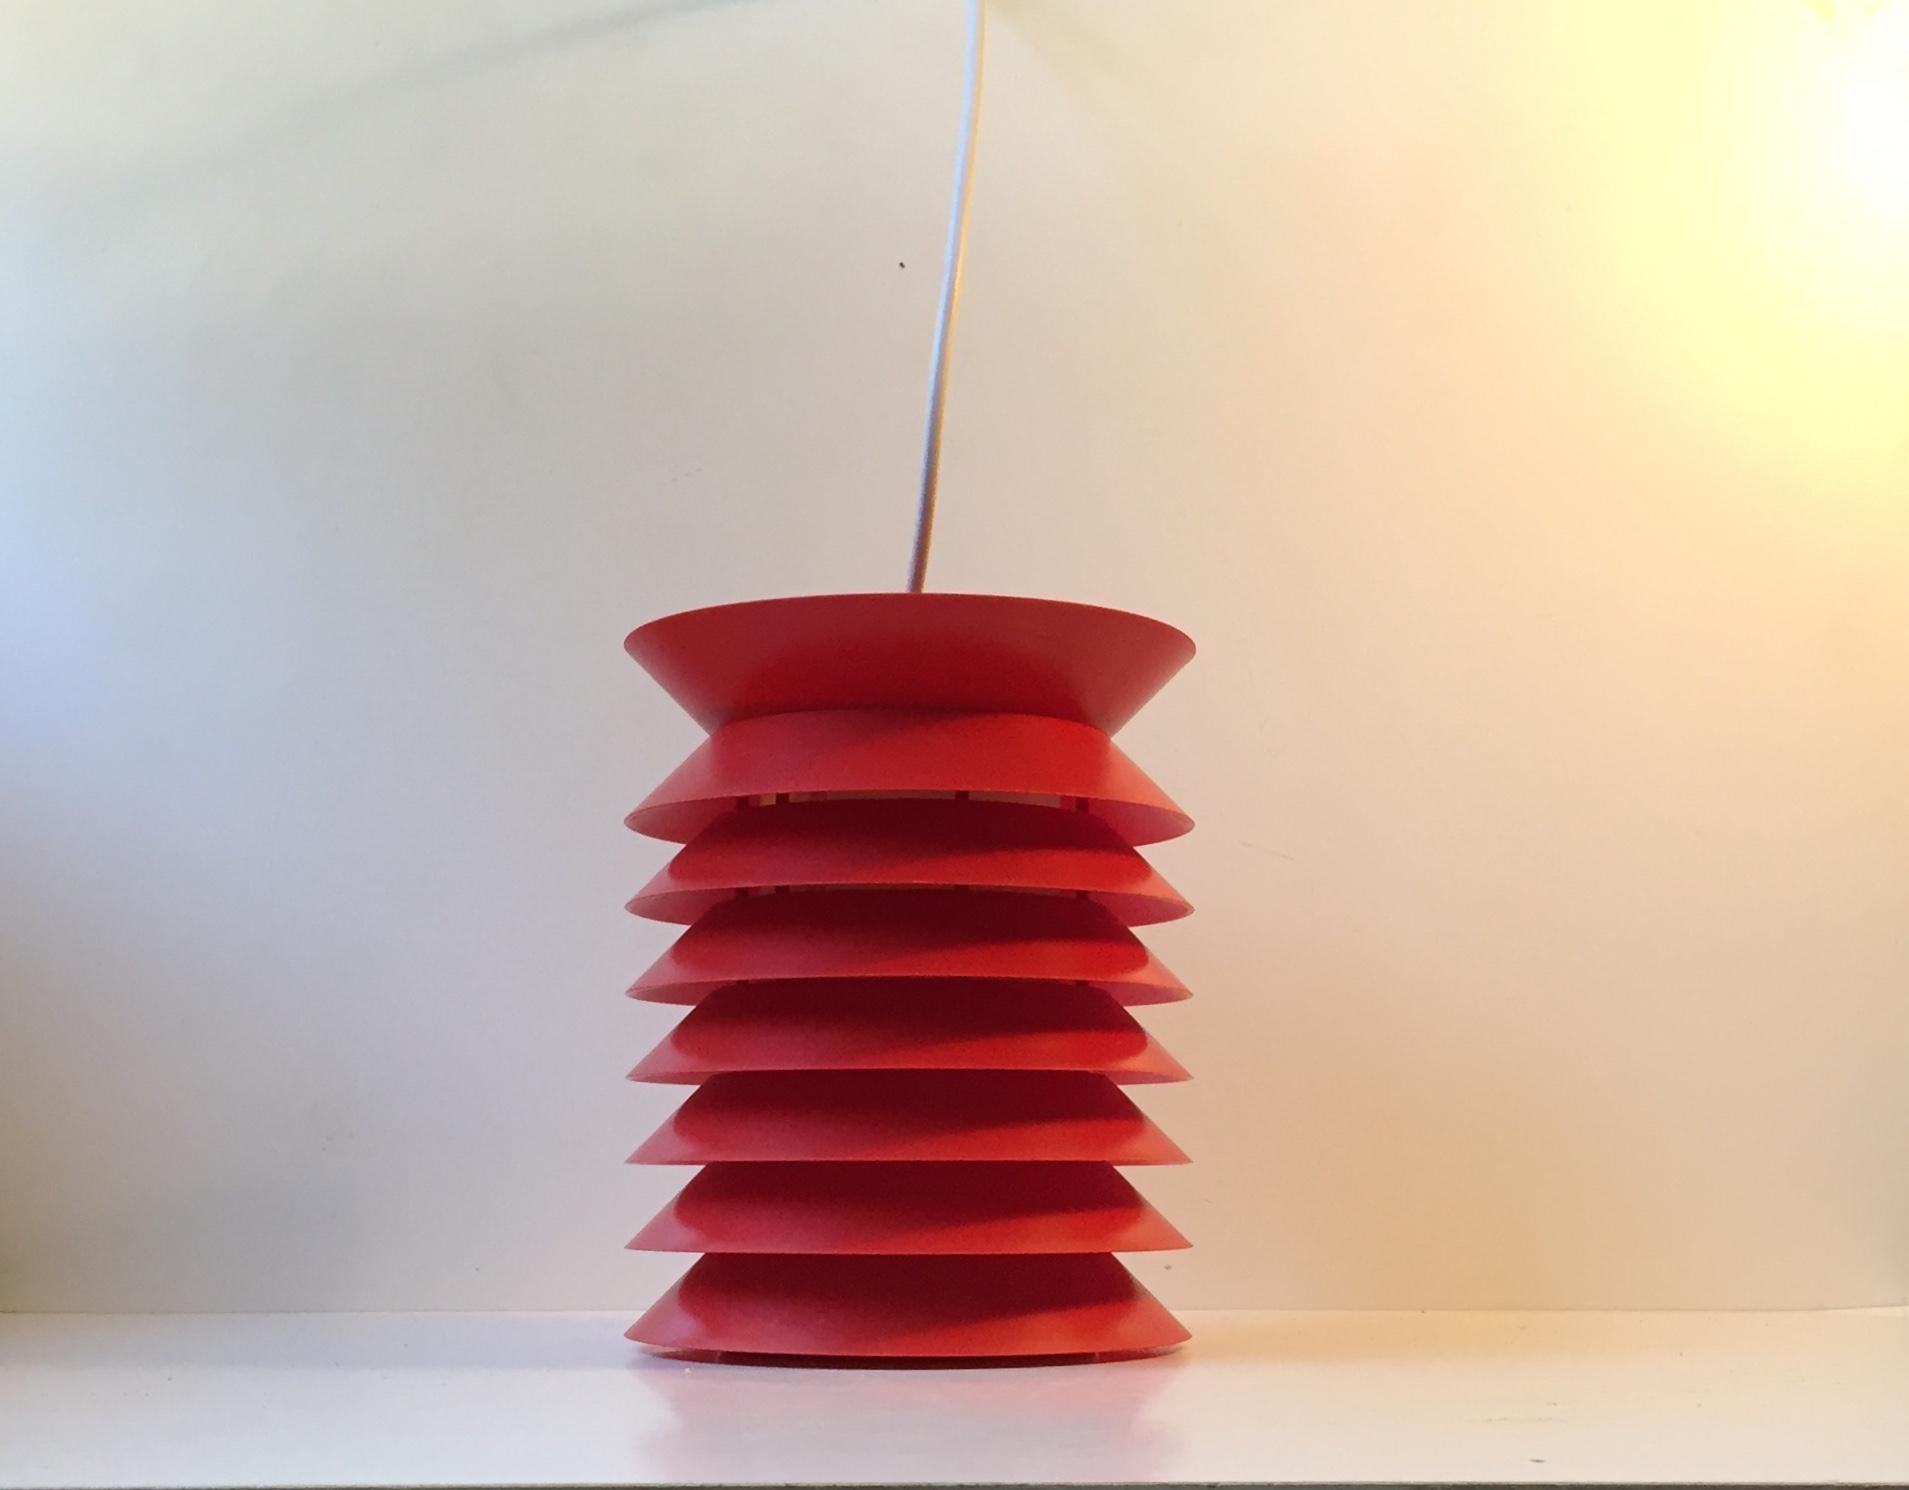 Red seven-tiered pendant lamp composed of plastic and a white light reflective acrylic tubular inner shade. The light features its original brass and porcelain socket. It was manufactured by Høyrup Lights in Denmark during the 1970s. This design by